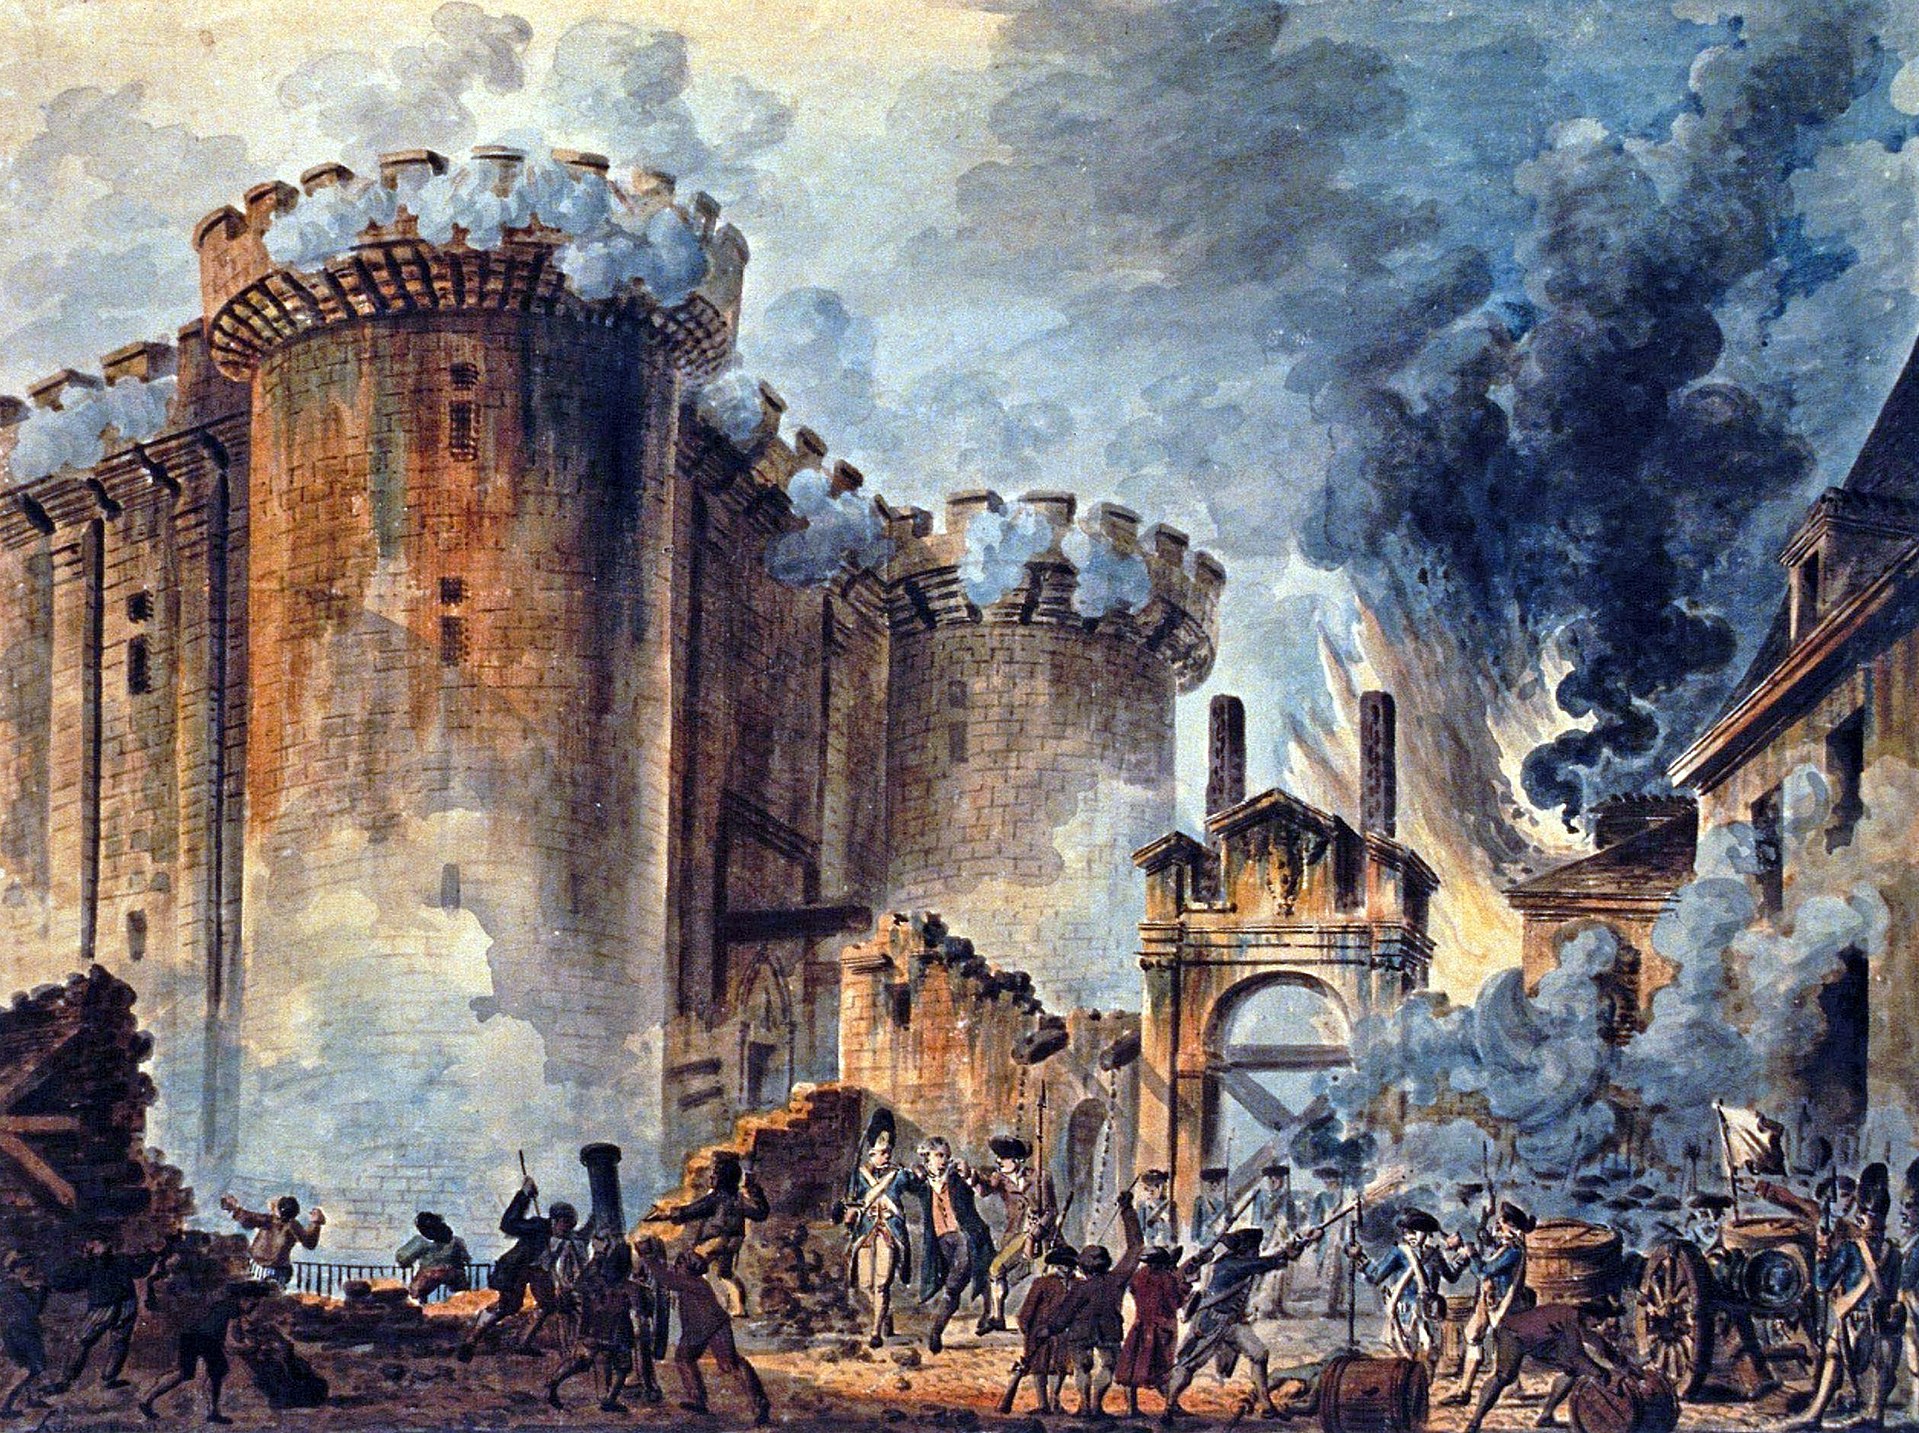 The People Emerge:The Storming of the Bastille – Solidarity